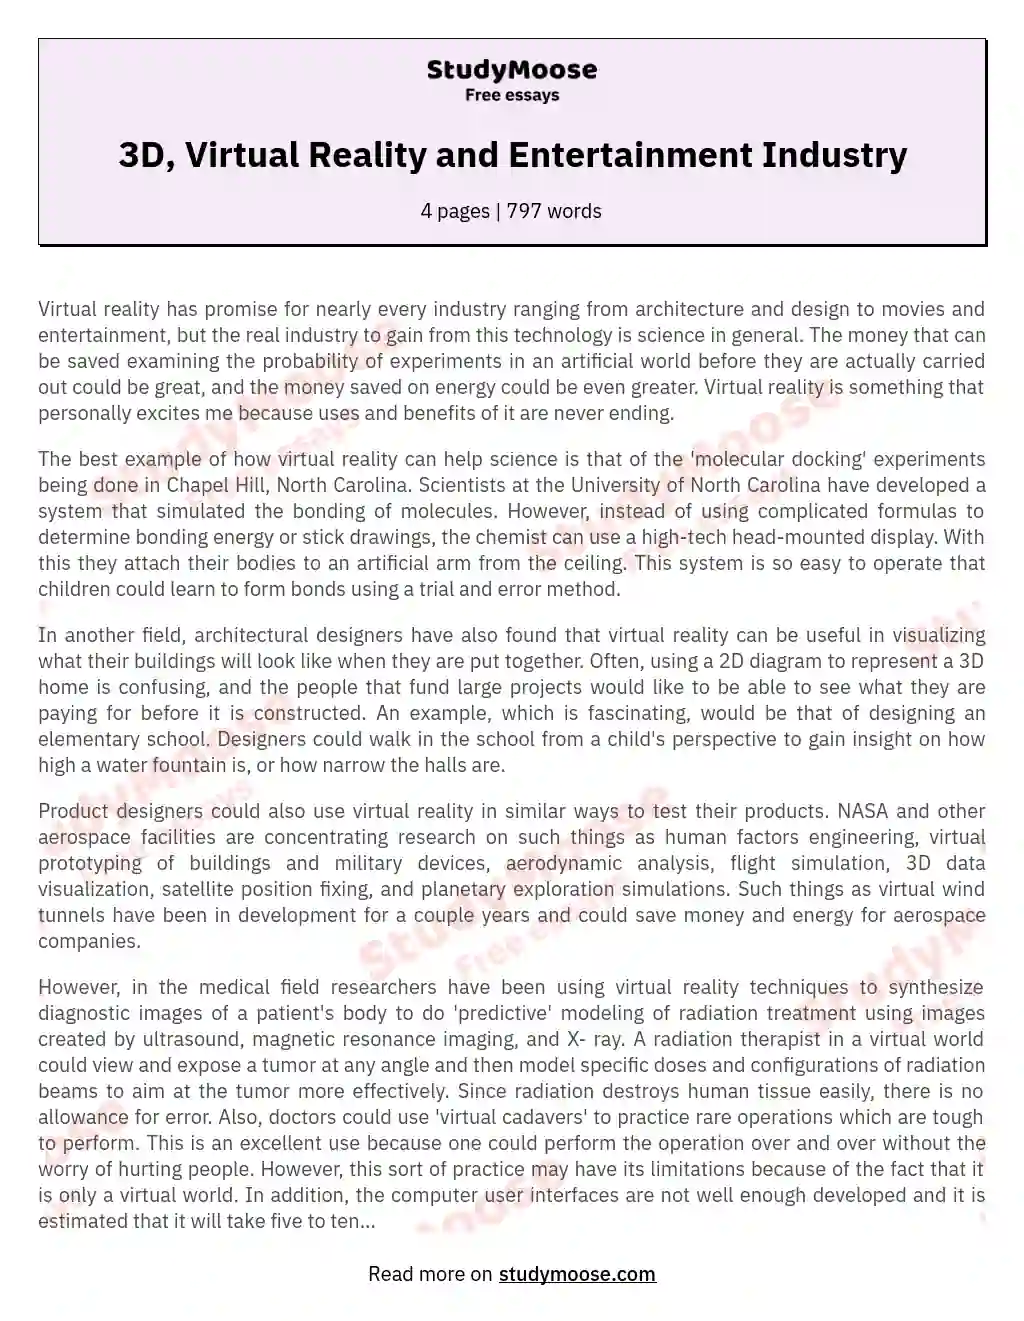 3D, Virtual Reality and Entertainment Industry